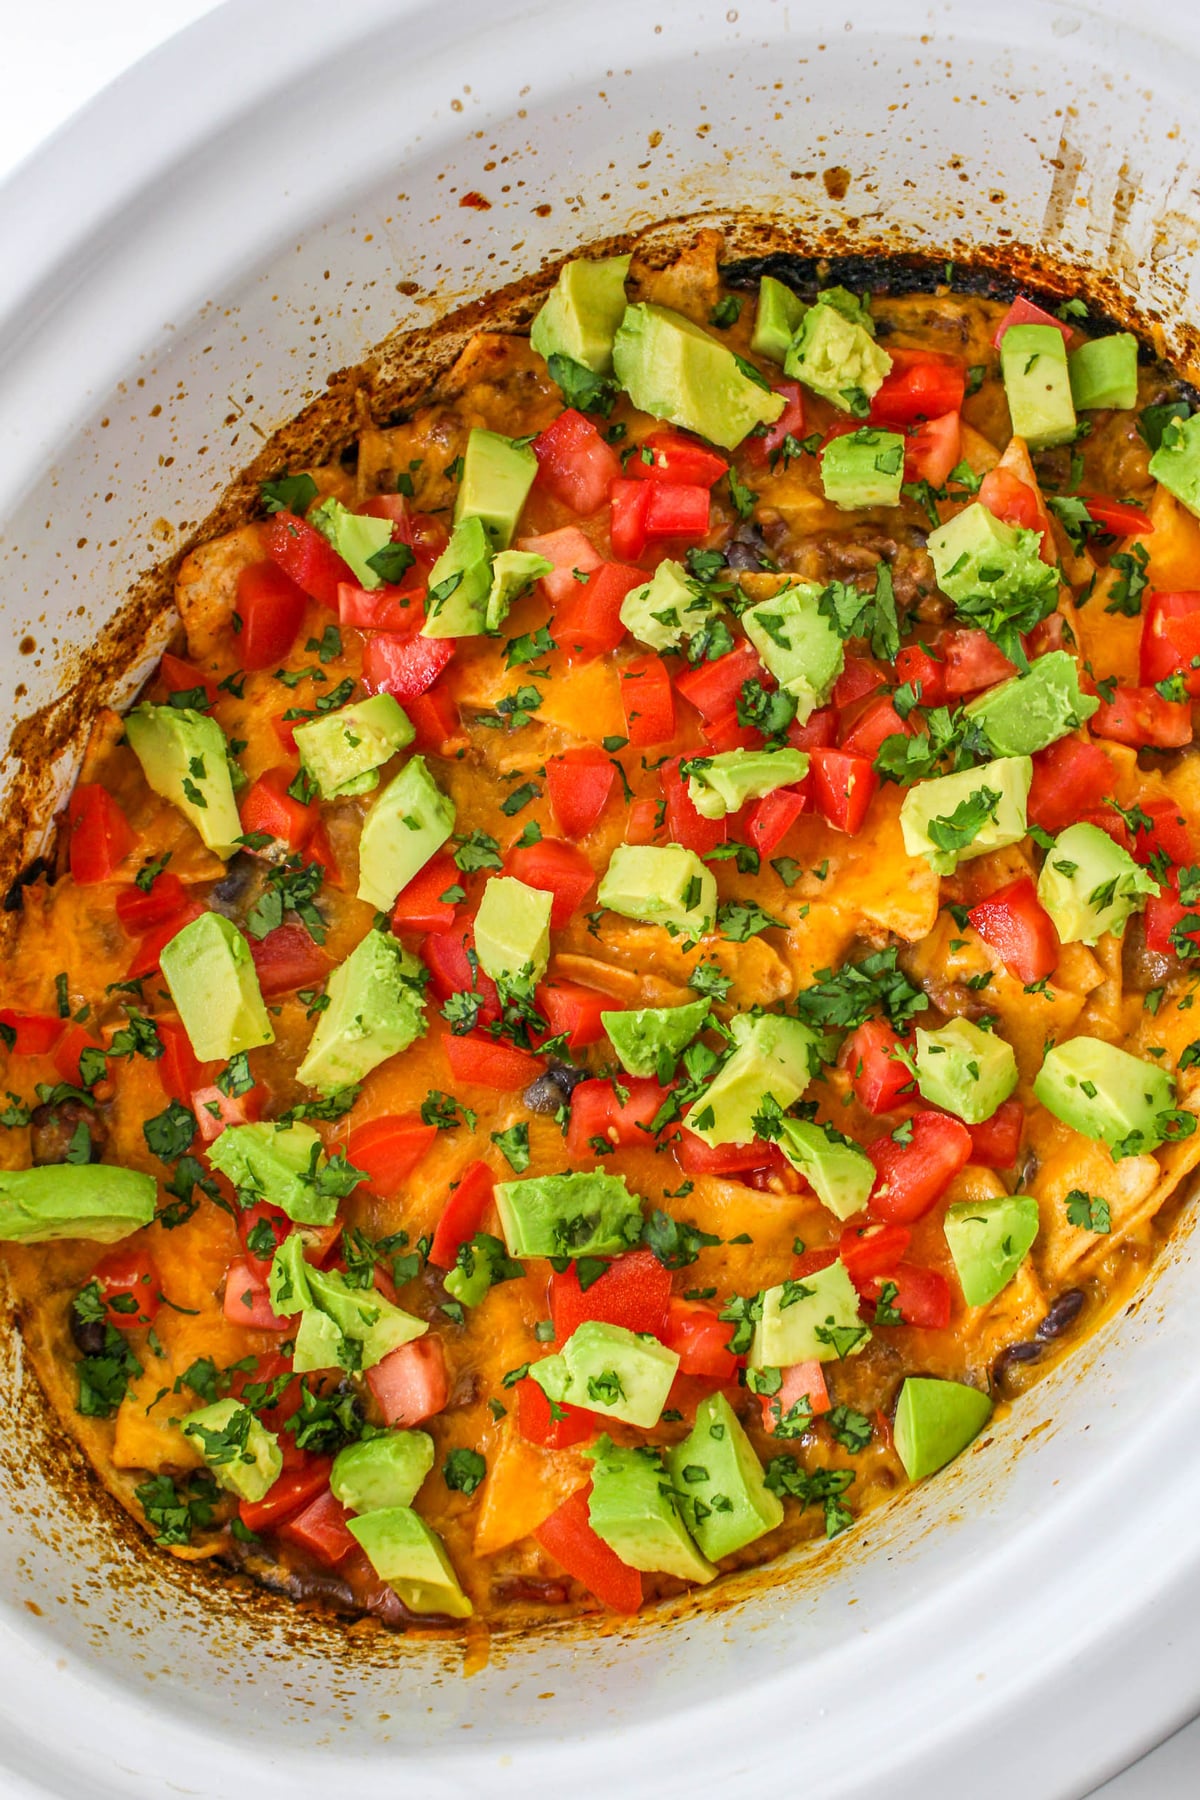 Topped the Crockpot Mexican Casserole with the diced avocado, fresh cilantro, and tomatoes.